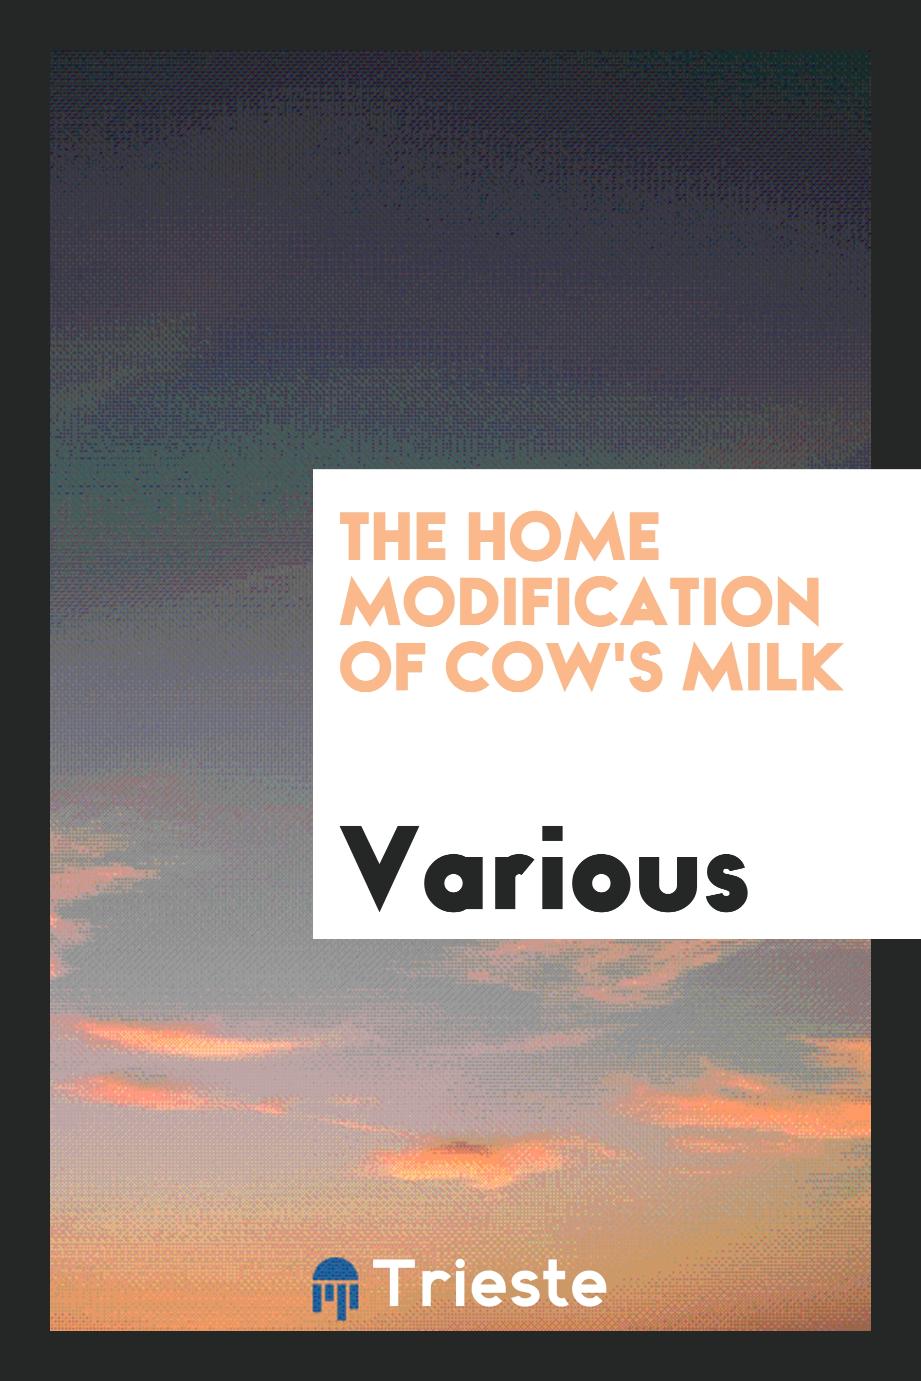 The Home modification of cow's milk